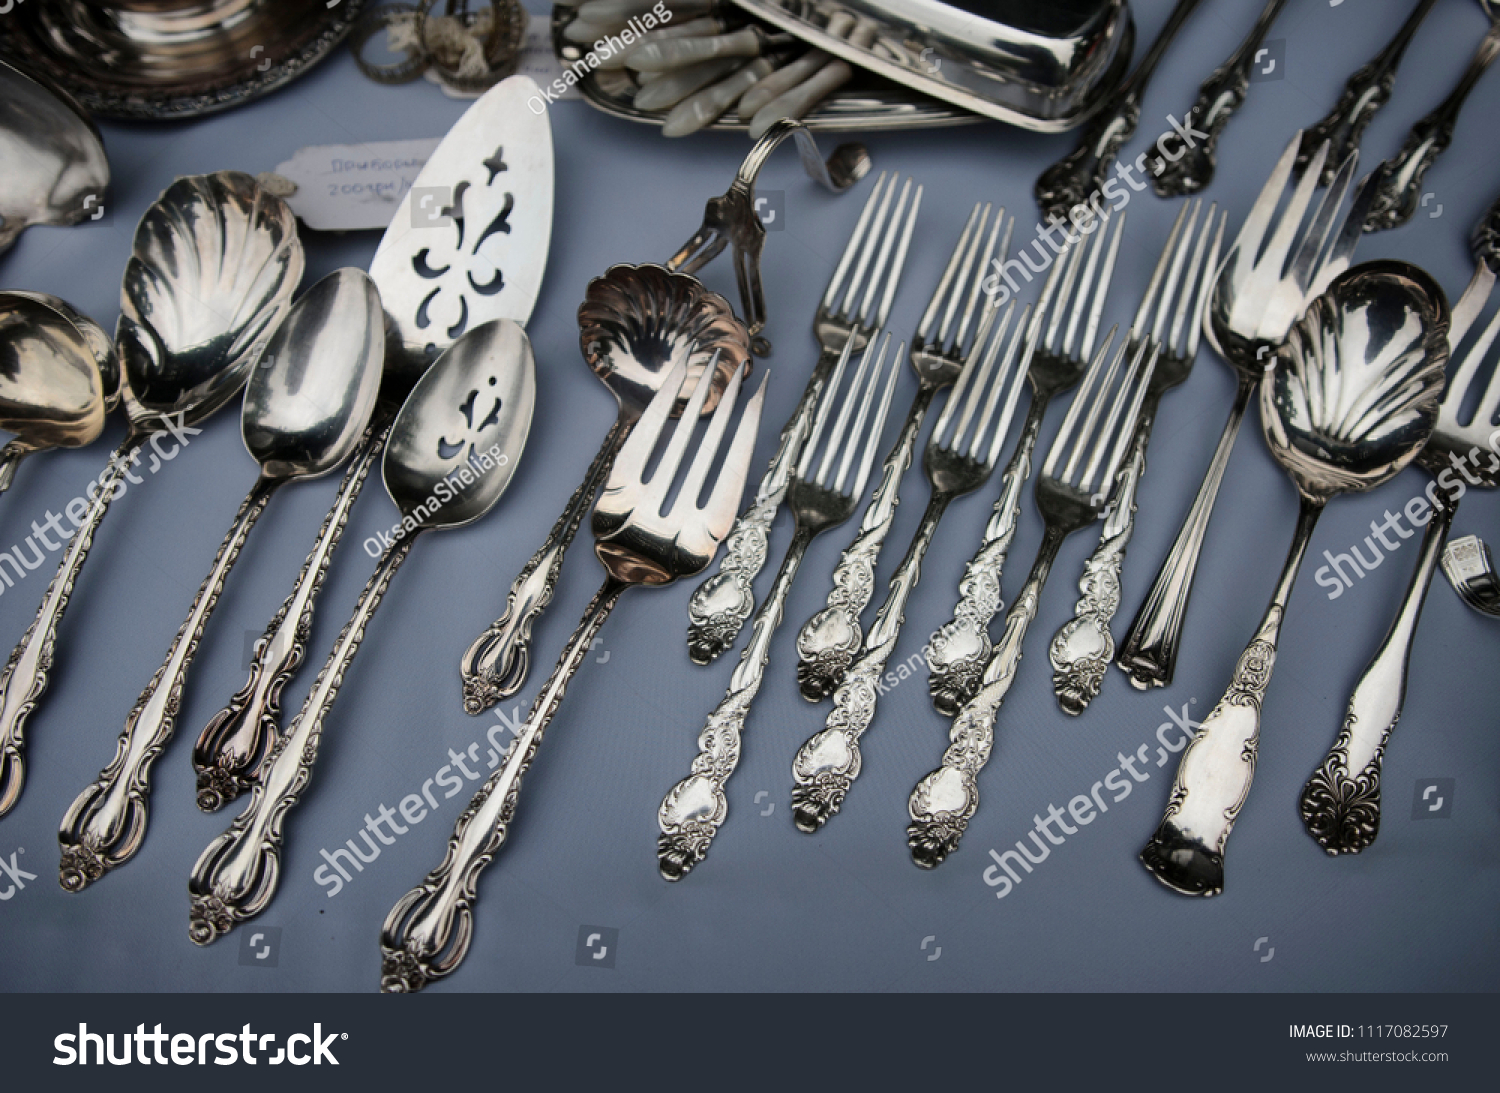 Buy Sell Antique Silverware Near Me With A Reserve Price Up To 69 Off